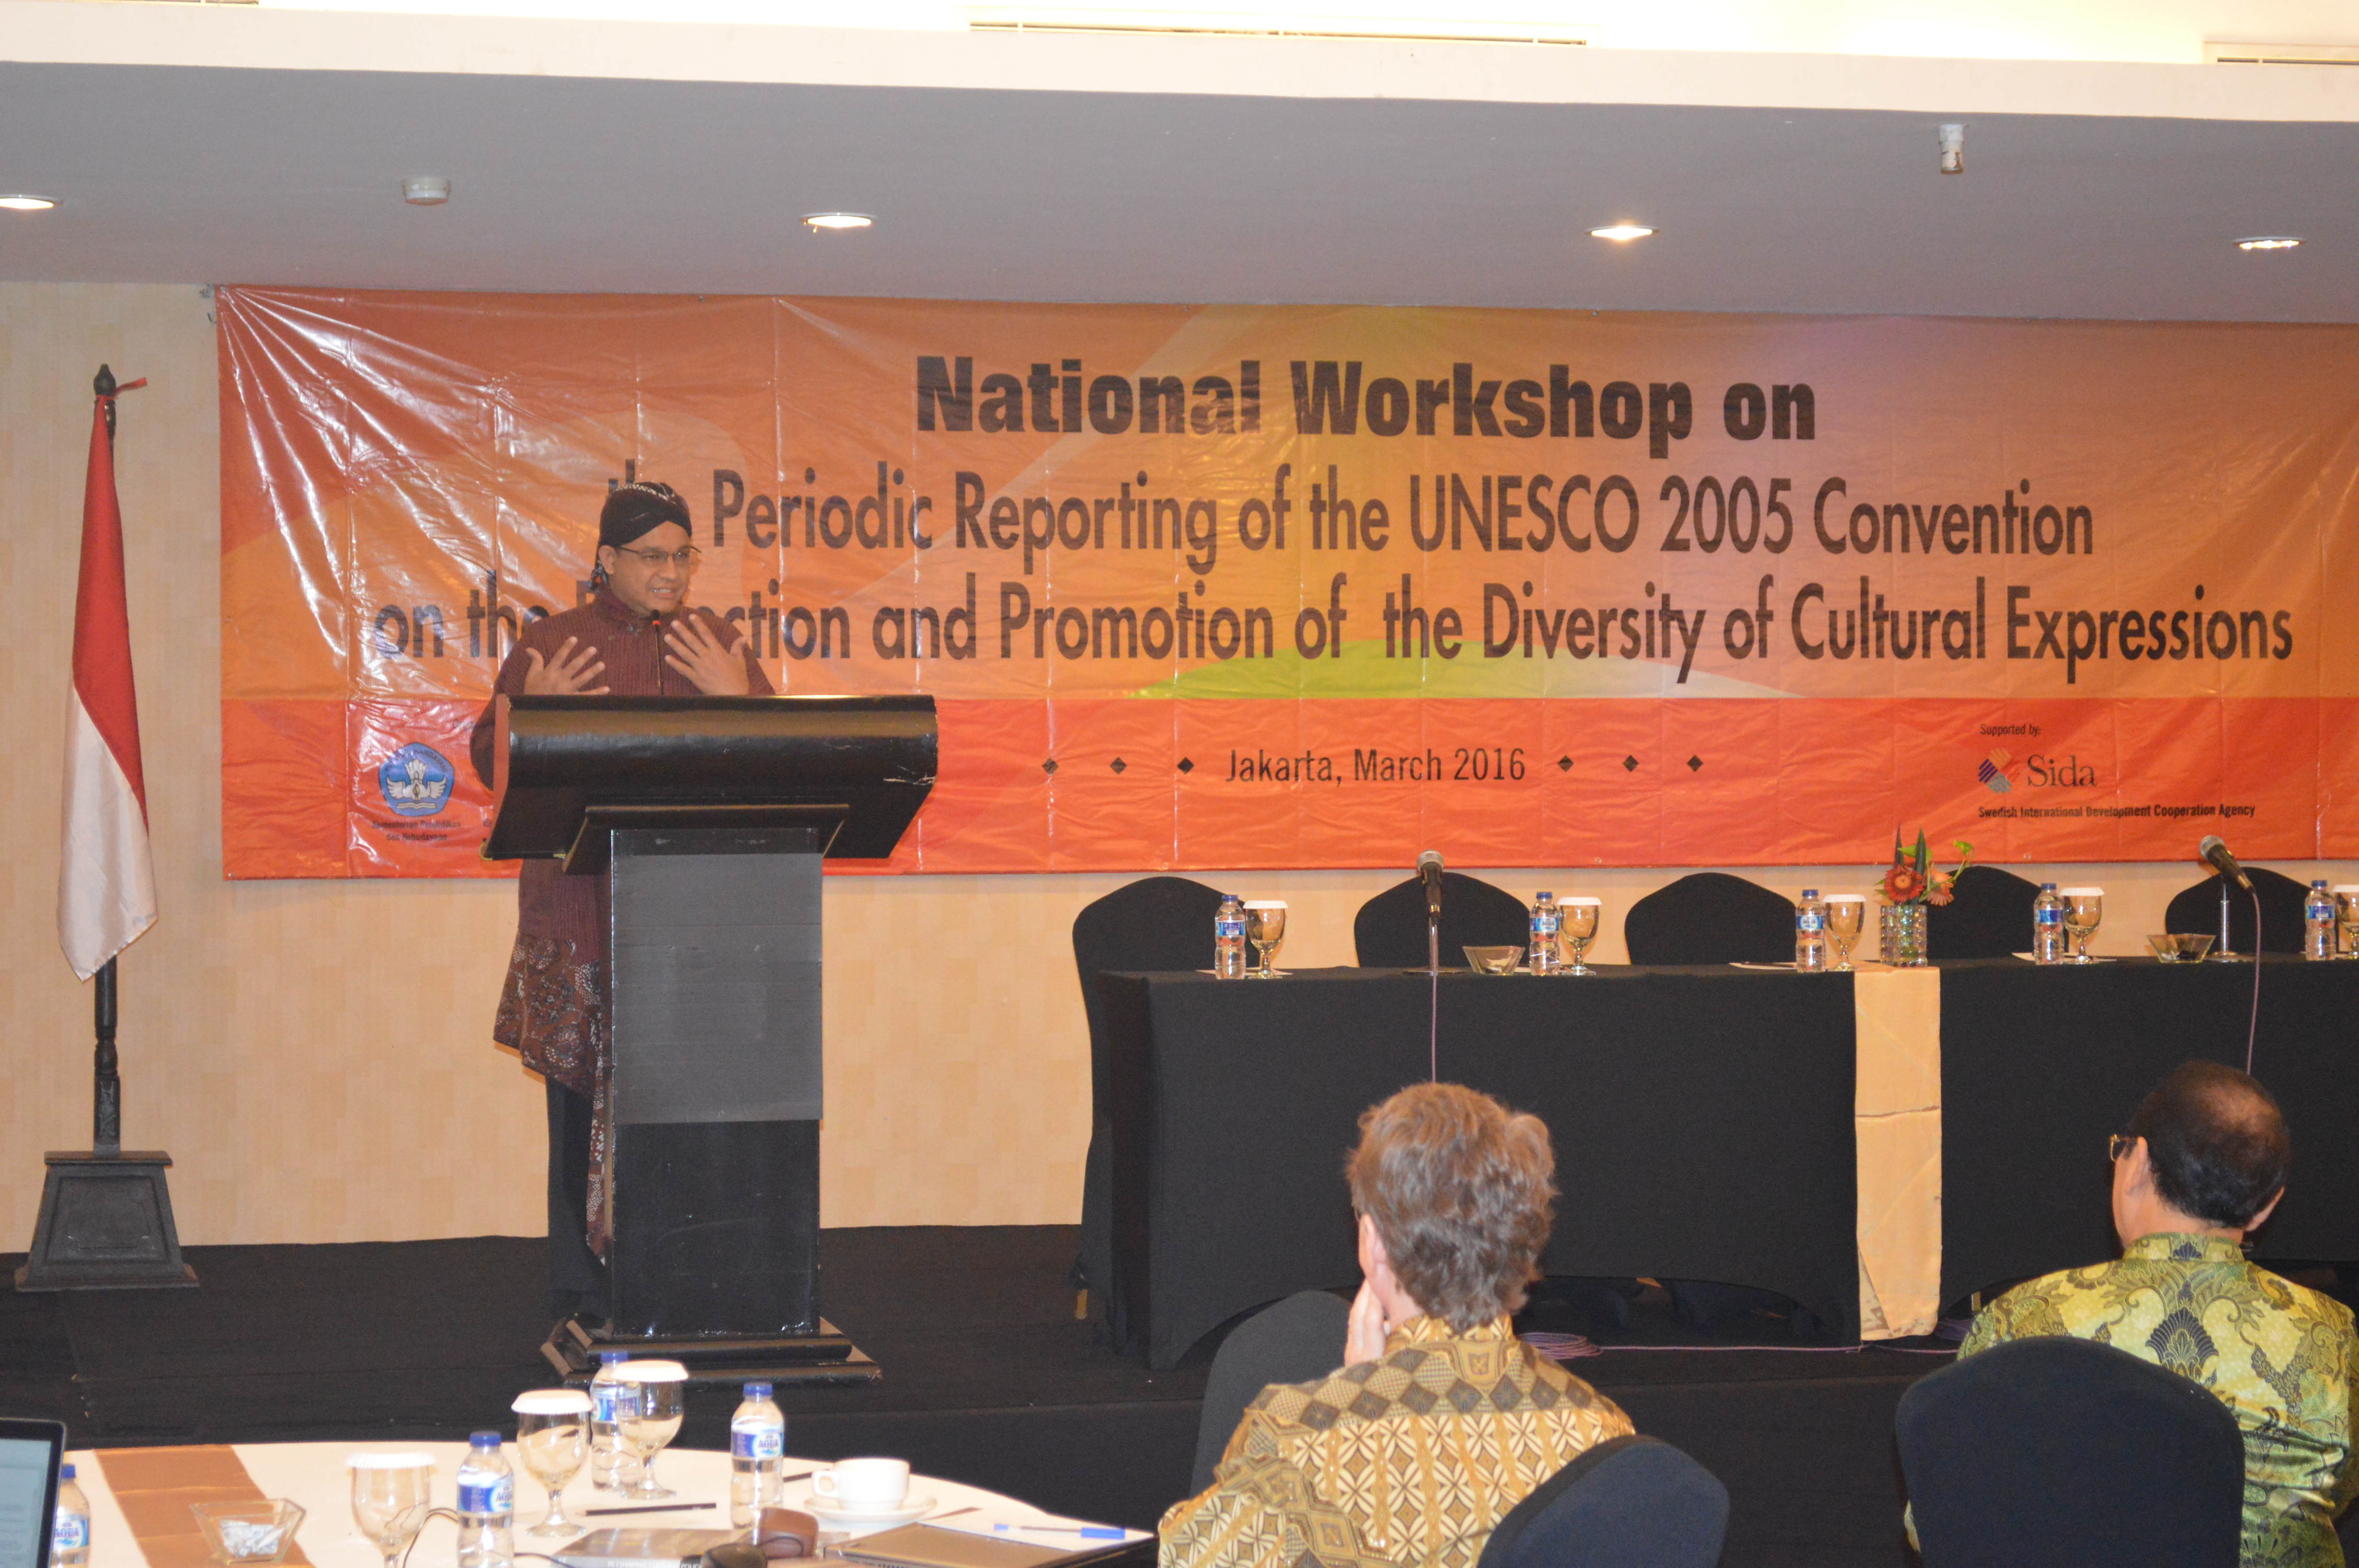 “National Workshop on the Periodic Reporting of the UNESCO 2005 Convention”